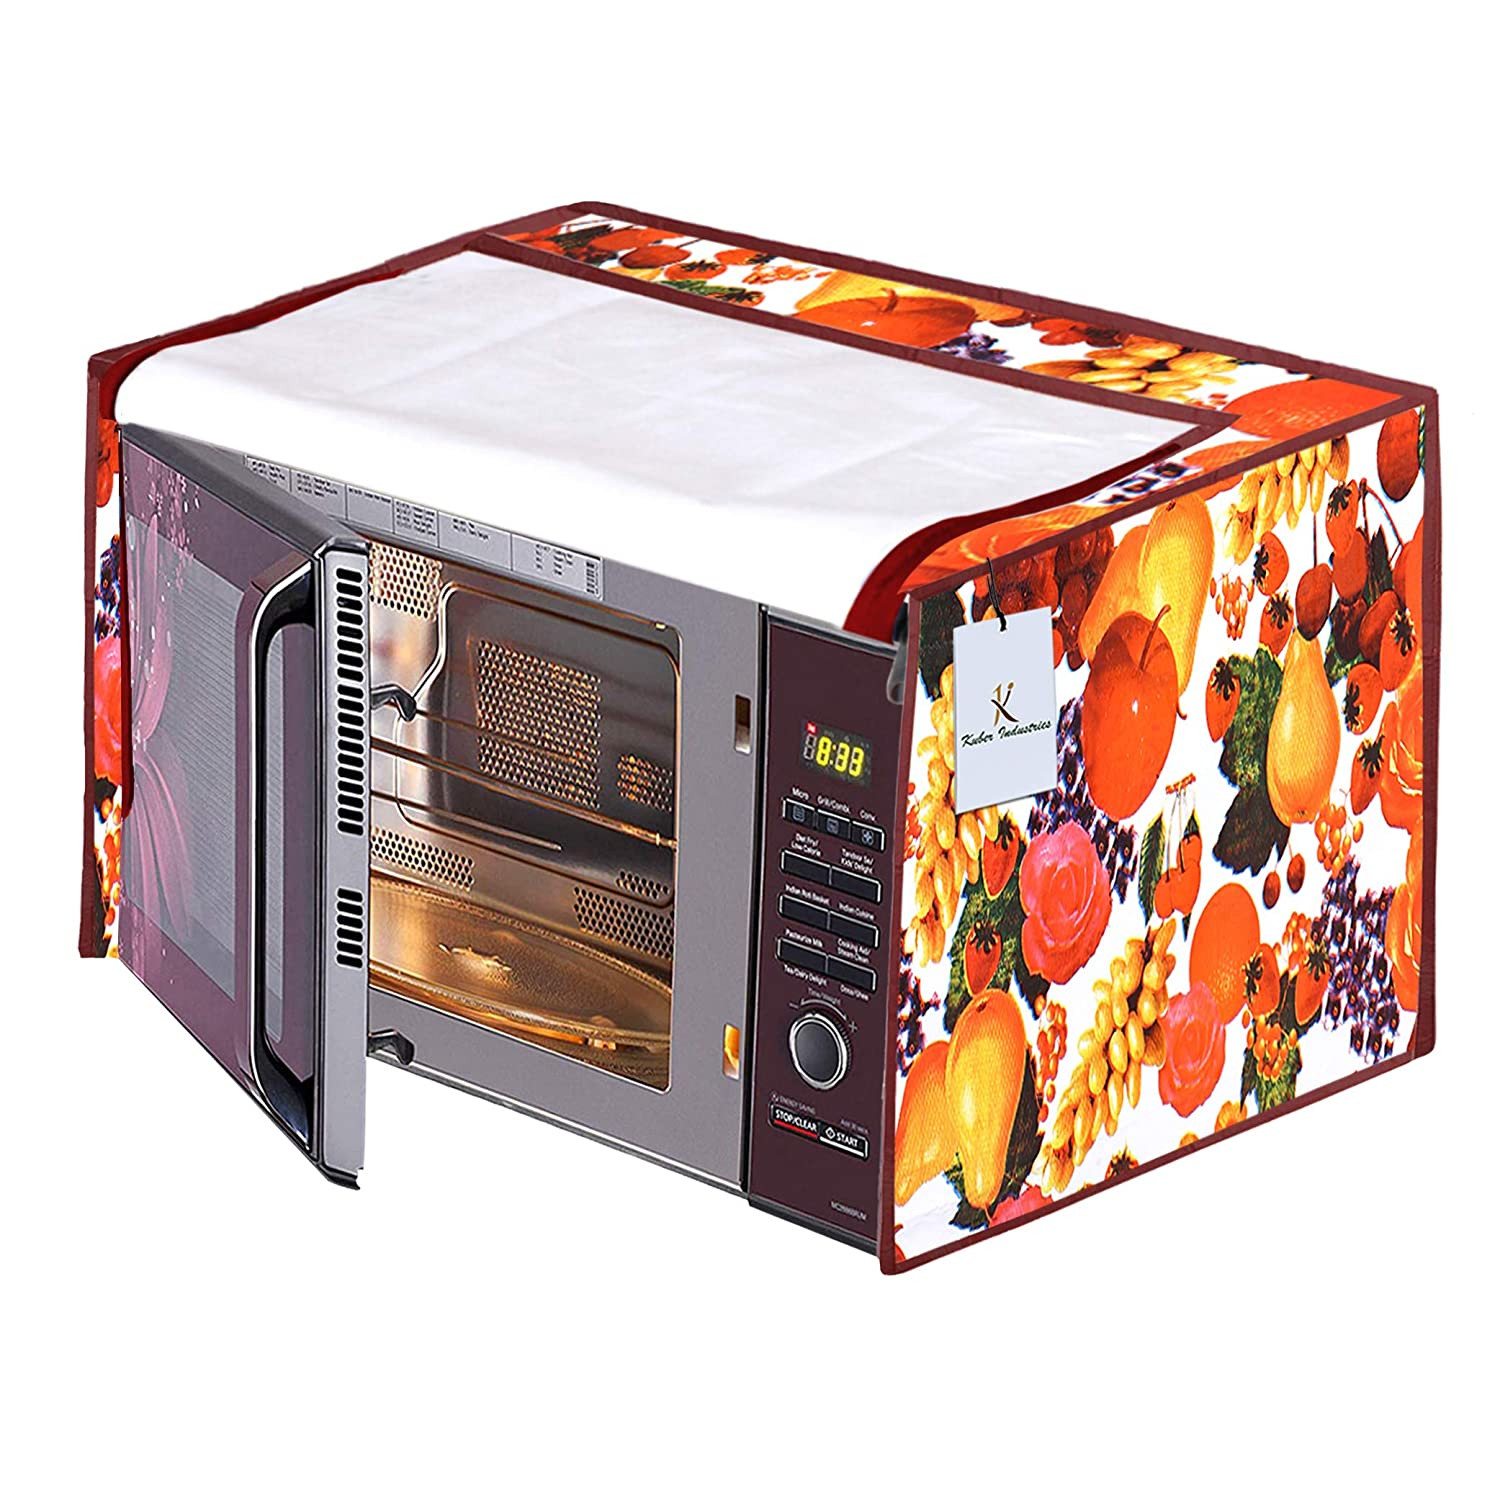 Kuber Industries PVC Fruit Printed Microwave Oven Cover,25 Ltr. (Multicolor)-HS43KUBMART26029